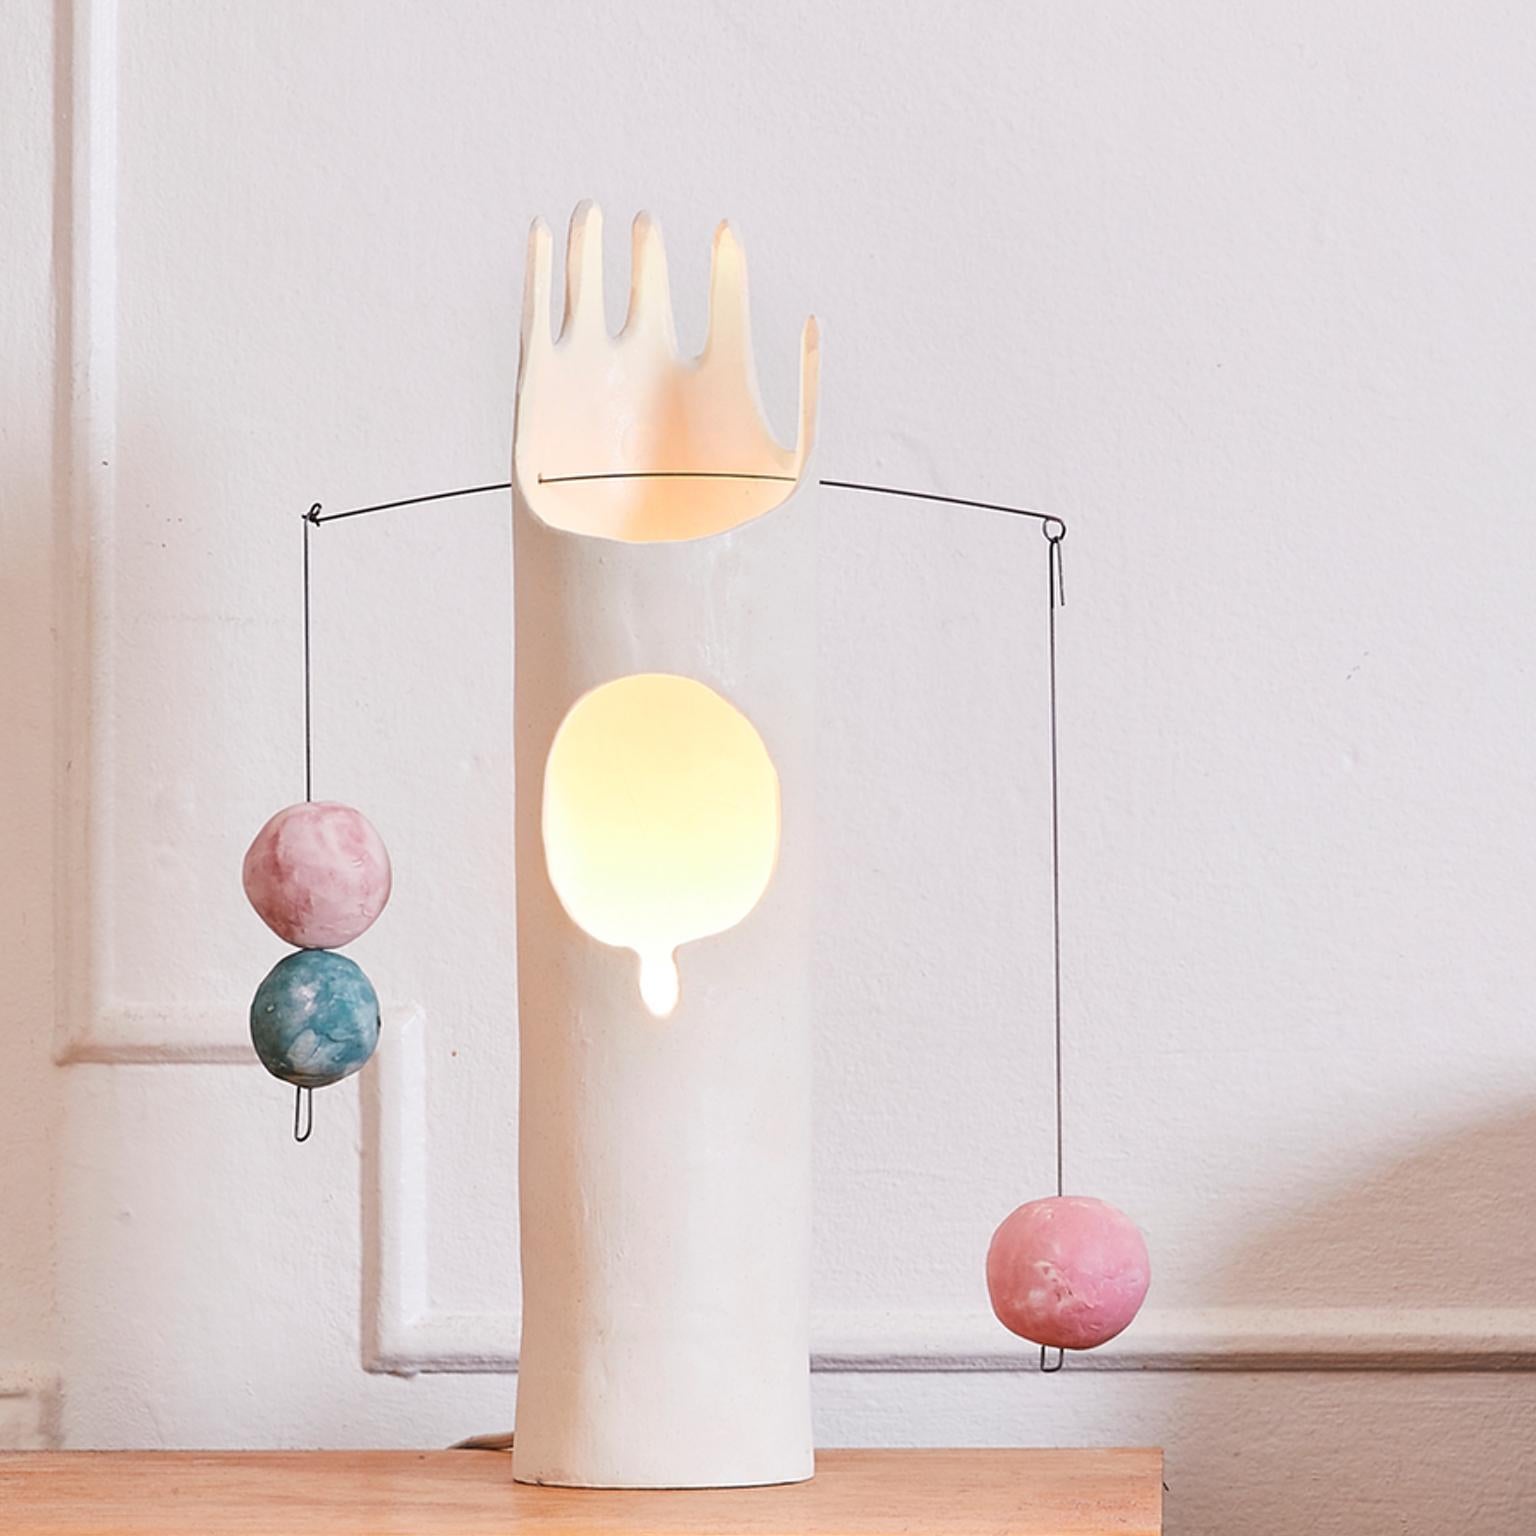 Nico is a hand-built sculptural ceramic table lamp that inspires the joy of working with hands through unpacking, assembling and balancing weights. The handmade ceramic globes and the hanging steel wire come fit right inside the belly of the